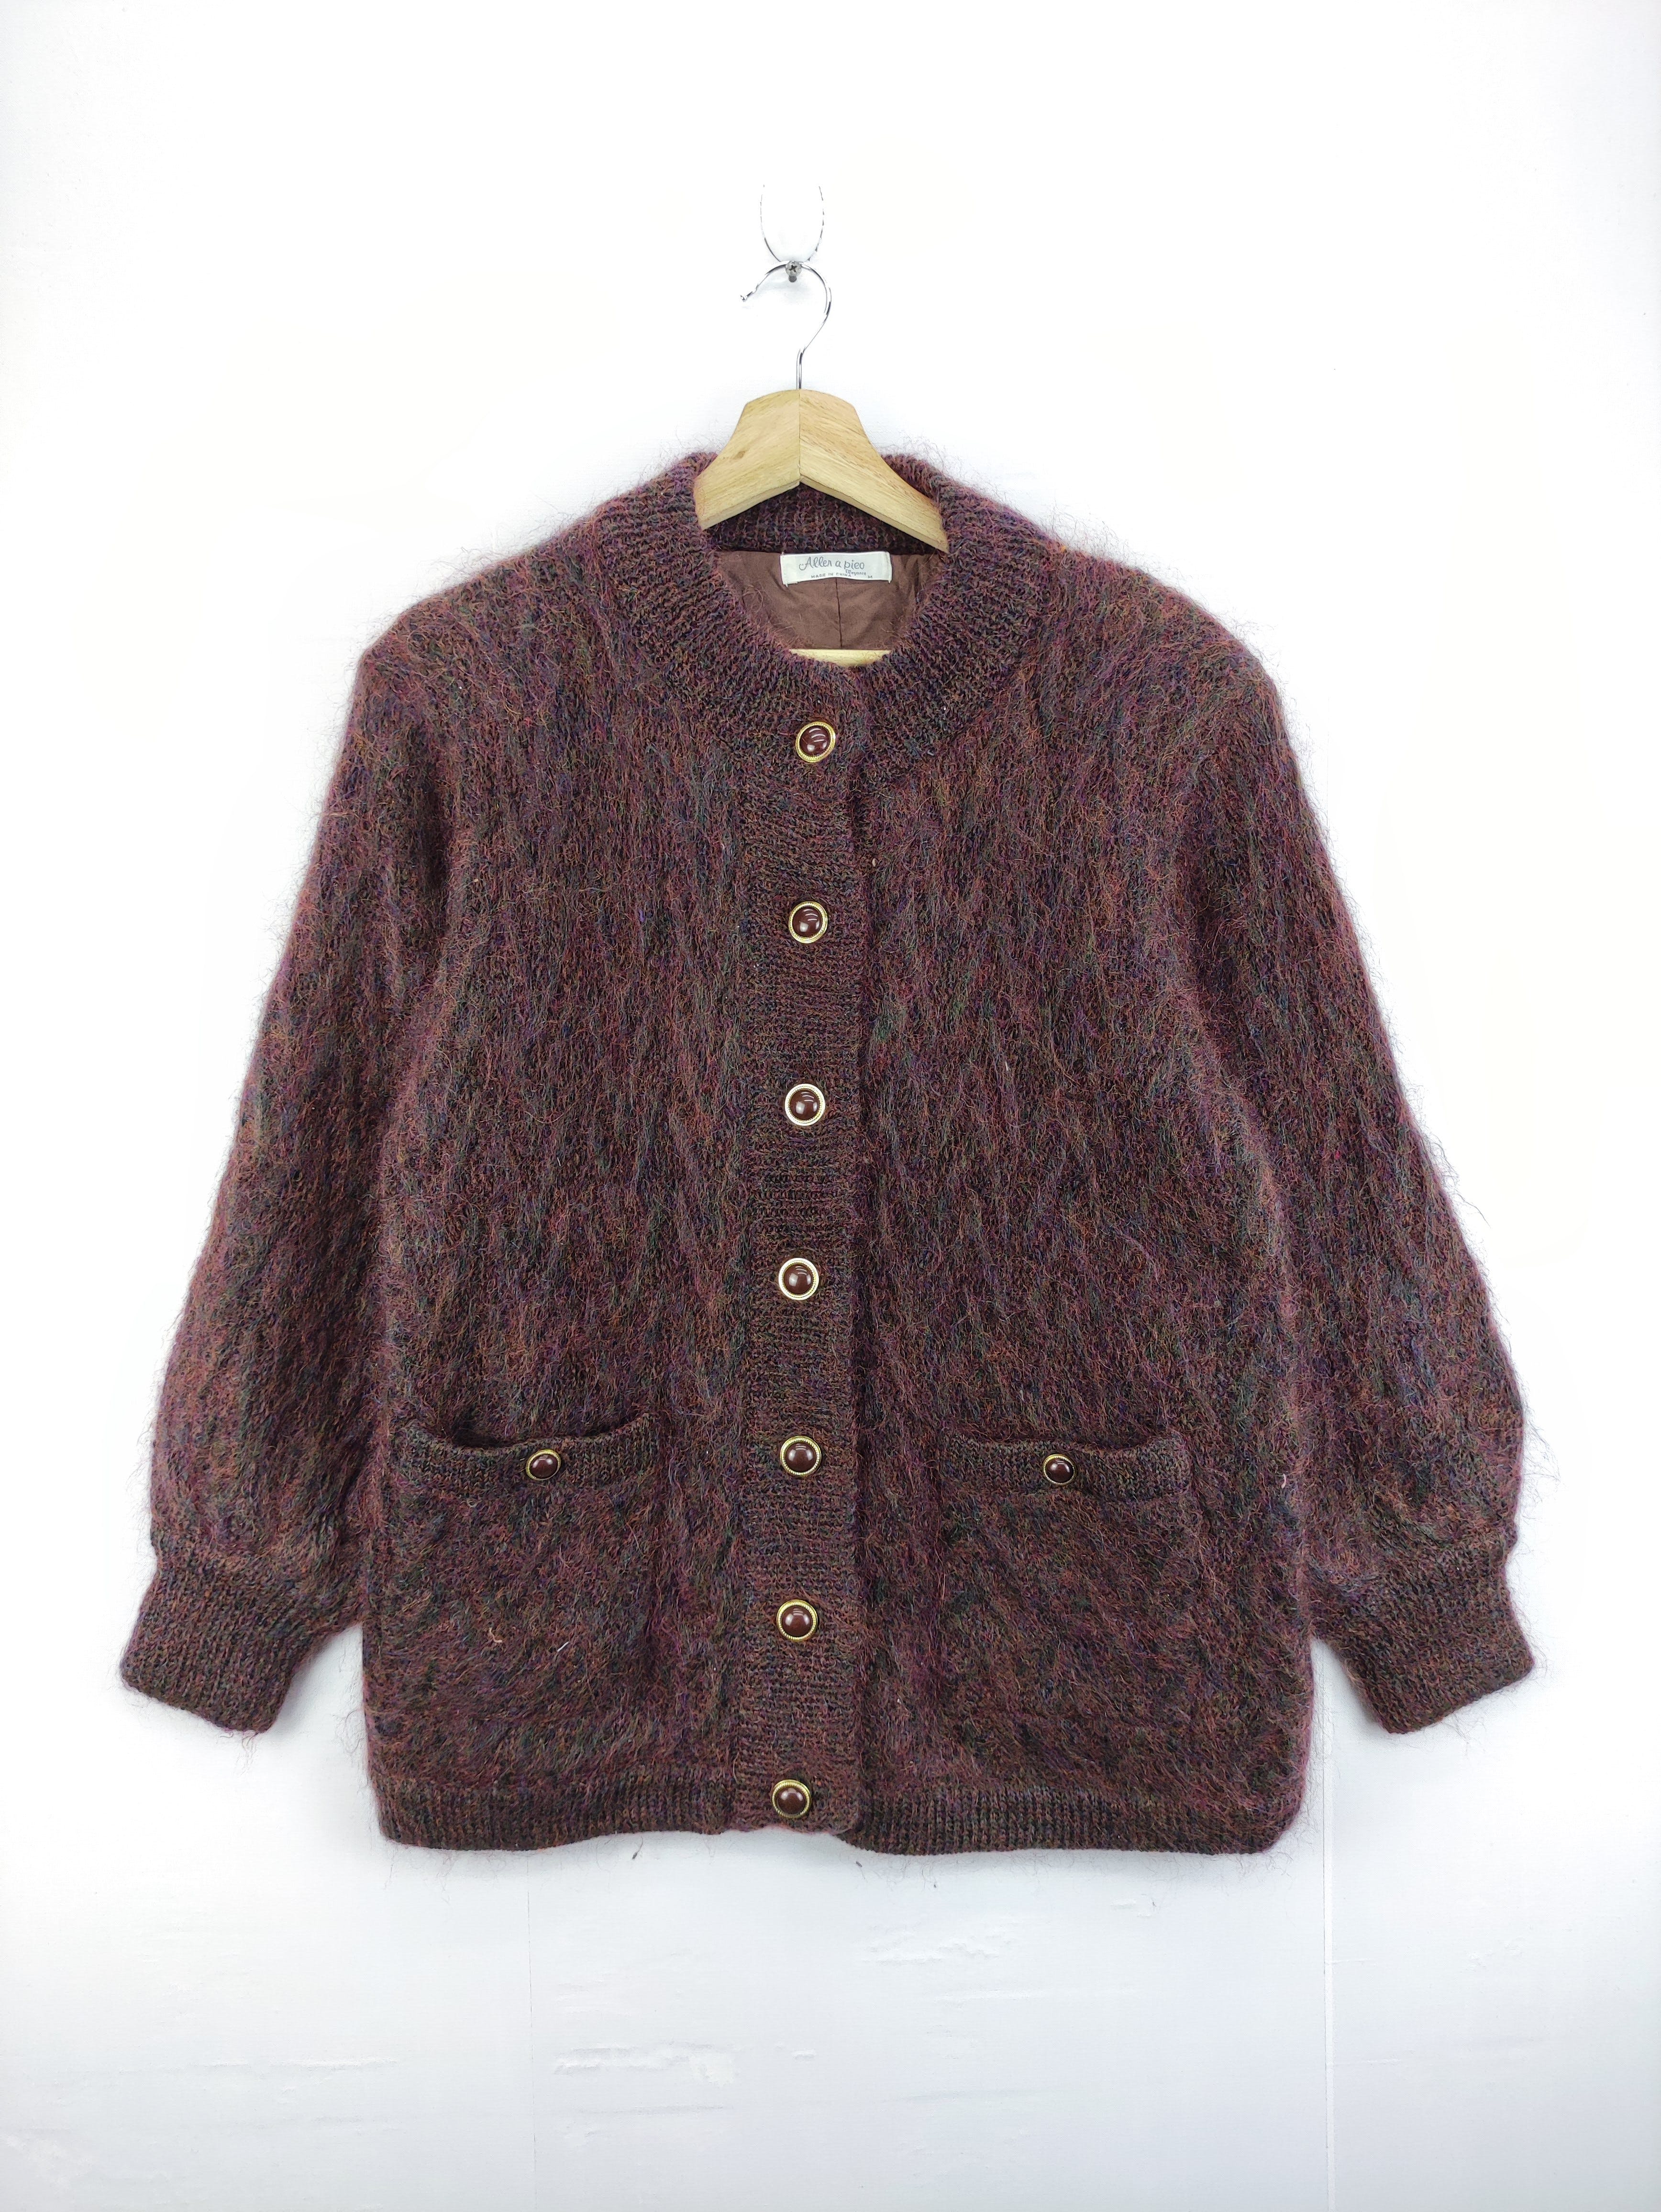 Vintage 90s Mohair Cardigan Button Up - 1